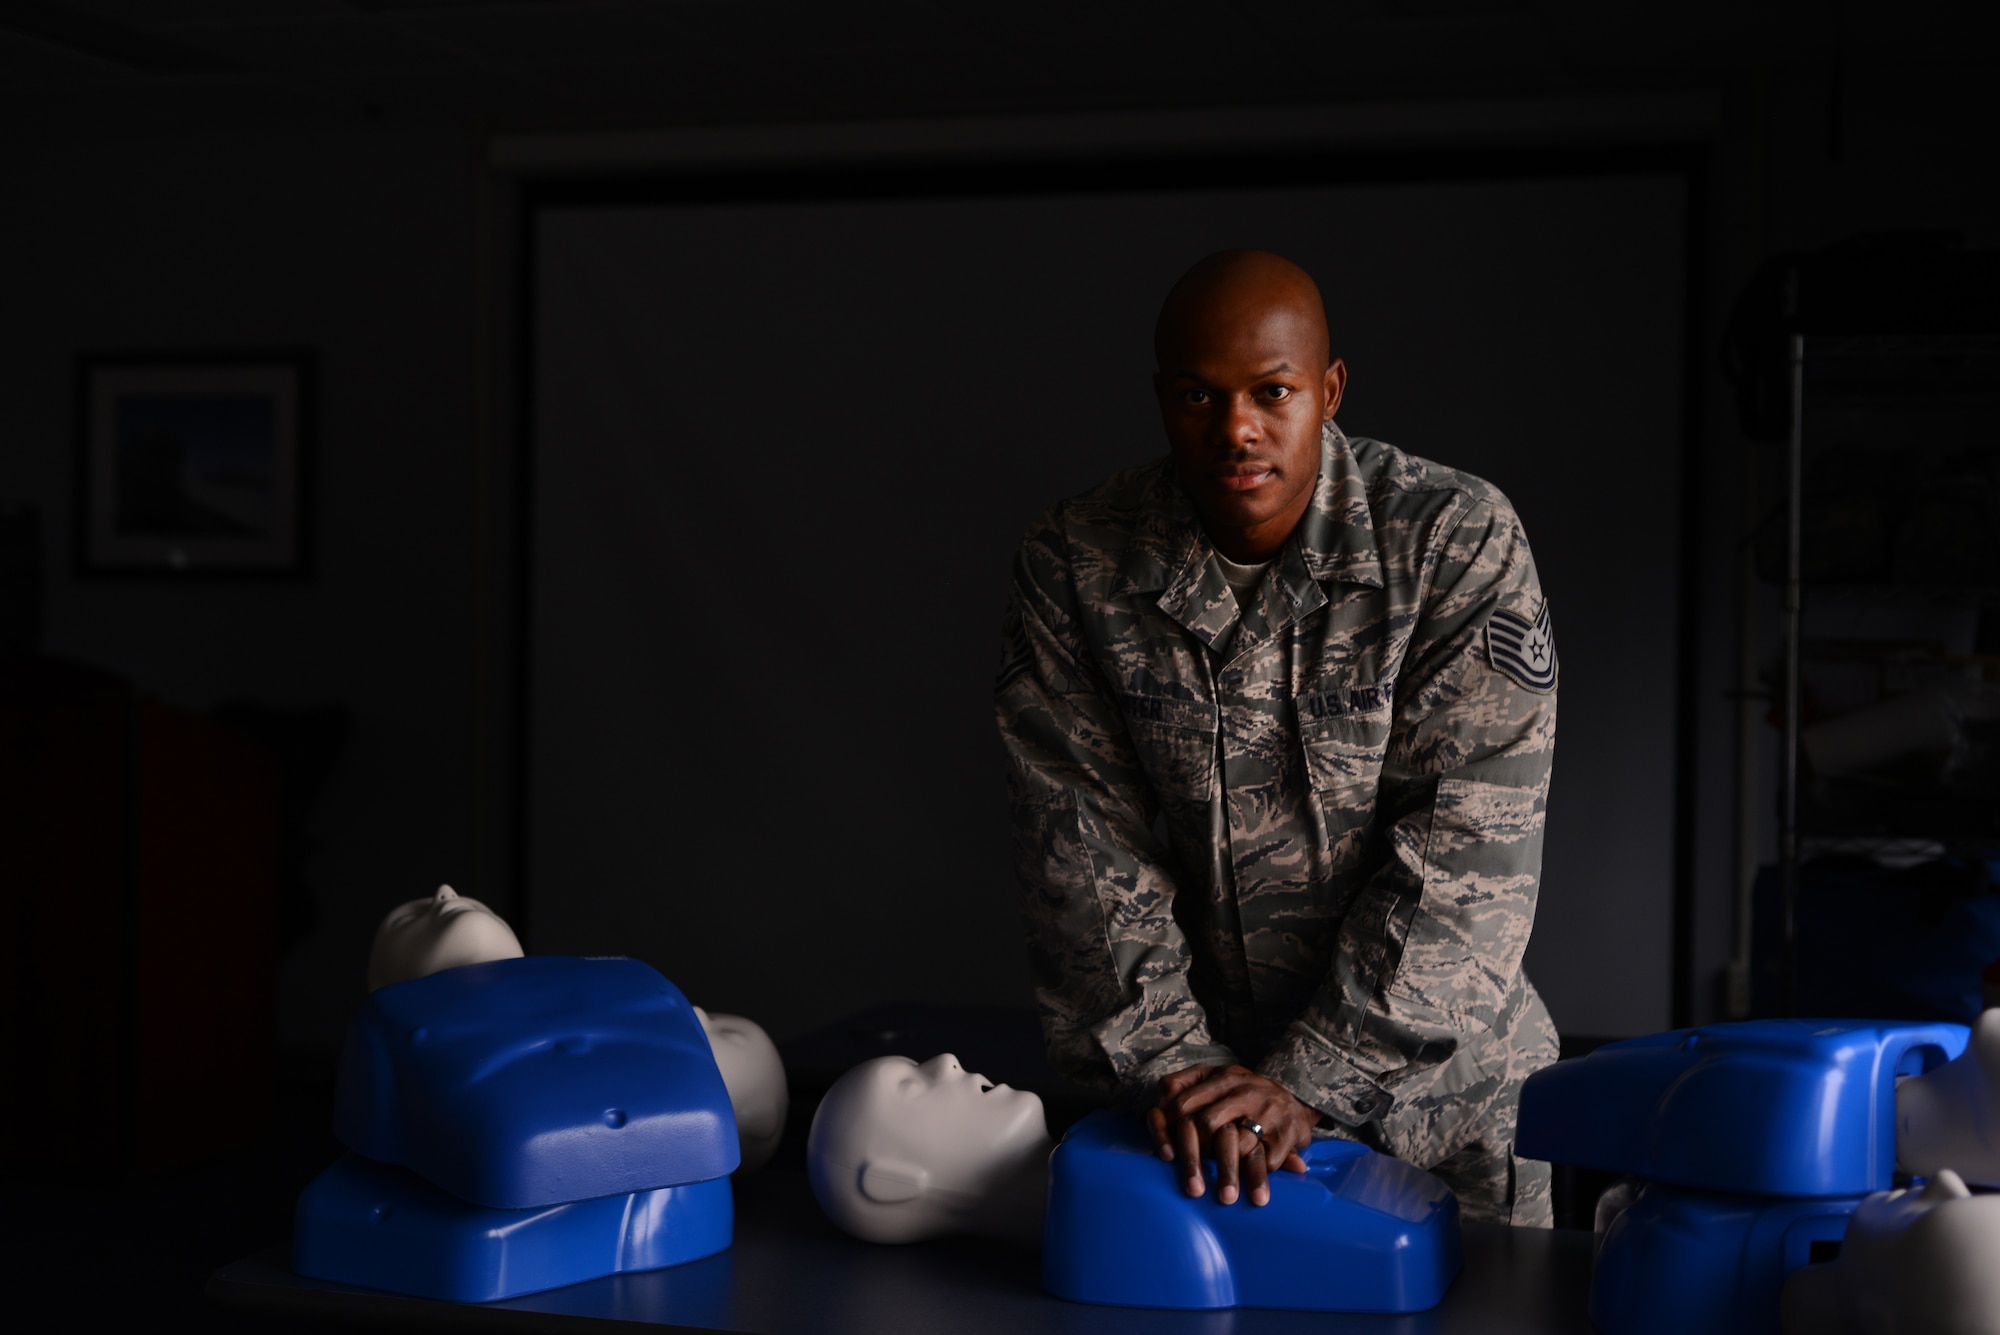 Tech. Sgt. Robert Niter, 47th Medical Group NCO in charge of optometry, poses for a portrait at the 47th Medical Group training classroom Oct. 23, 2014. Niter is the Basic Life Support program director for the 47th Flying Training Wing and is responsible for training individuals requiring cardiopulmonary resuscitation certification. (U.S. Air Force photo by Staff Sgt. Steven R. Doty)(Released)